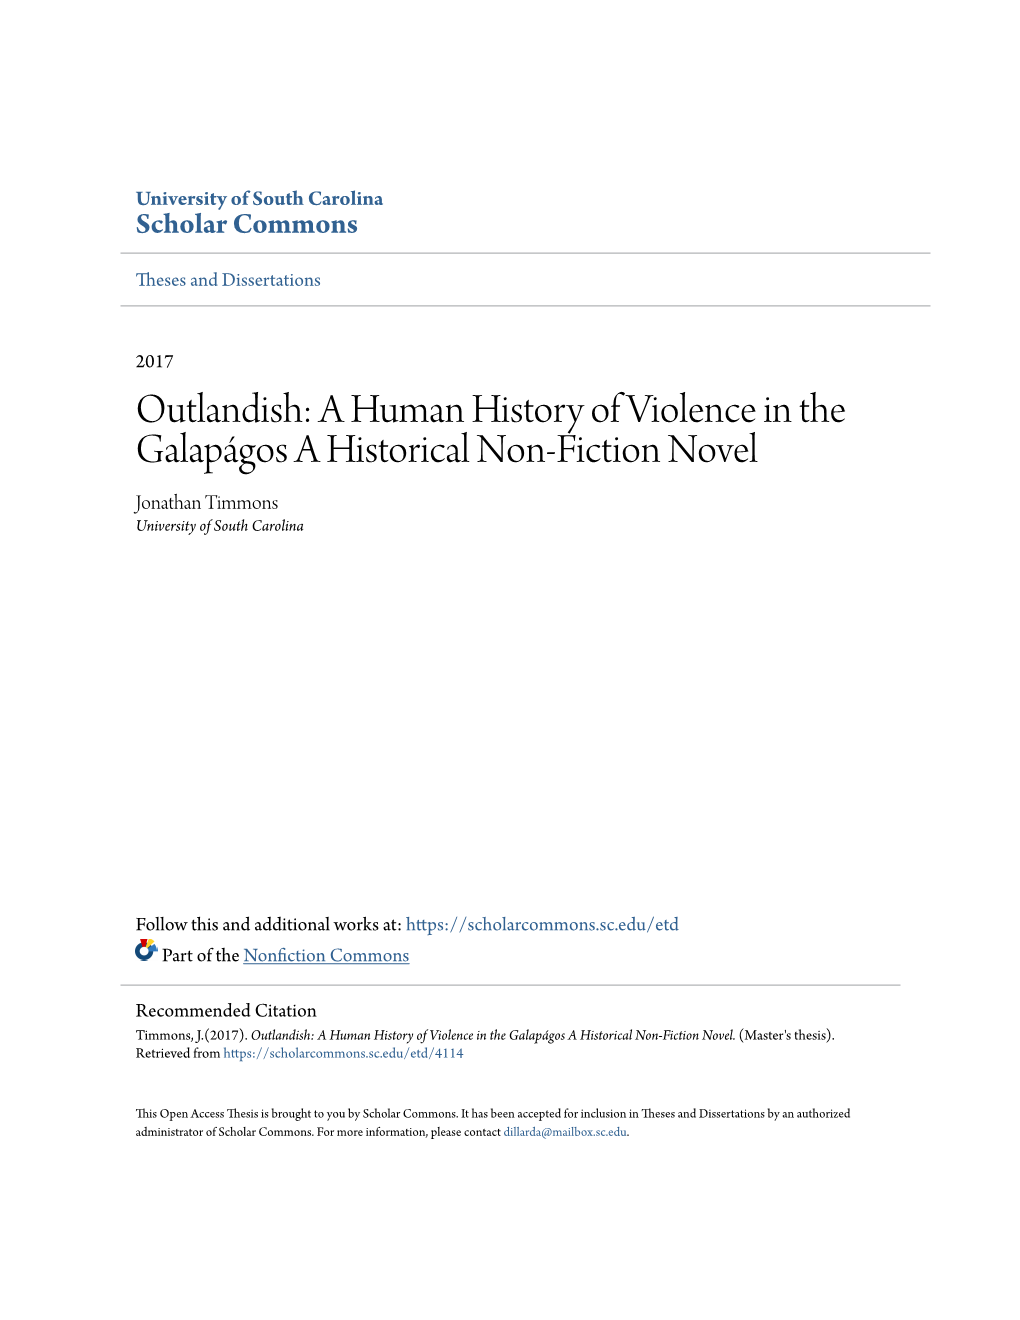 A Human History of Violence in the Galapágos a Historical Non-Fiction Novel Jonathan Timmons University of South Carolina